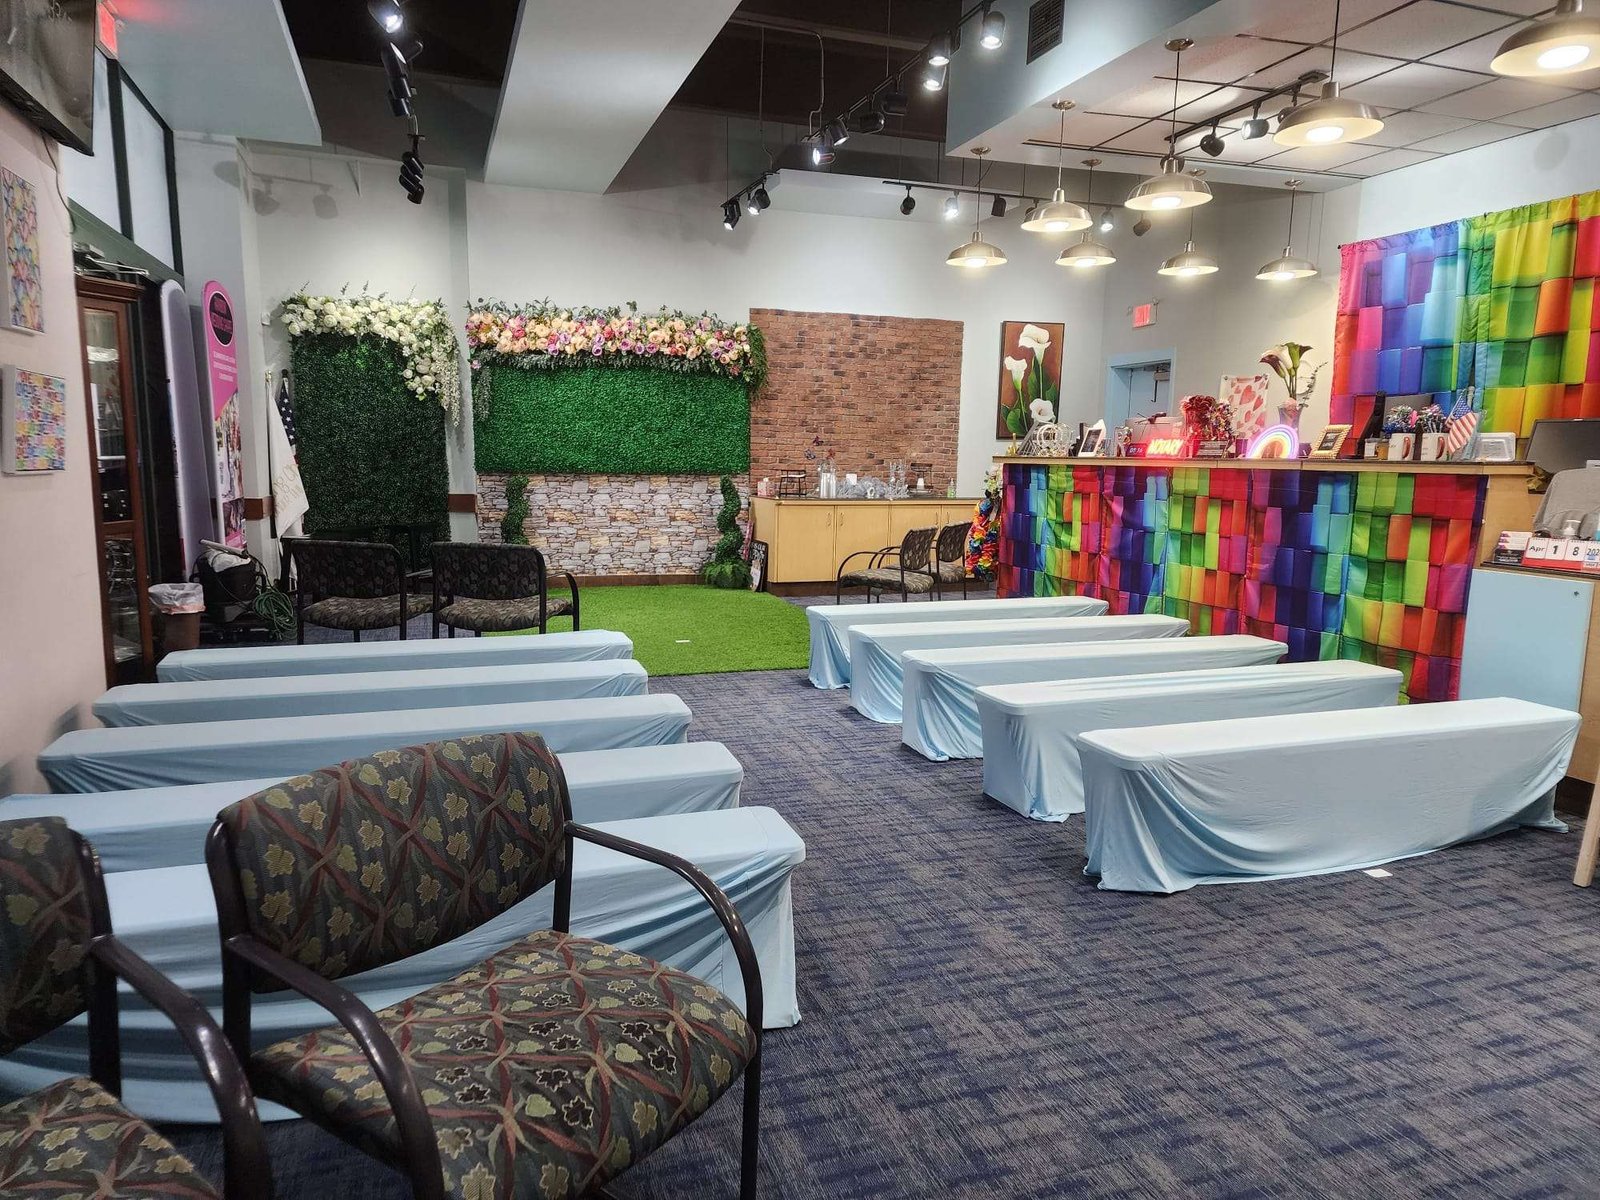 Colorful event space with seating and floral decor.